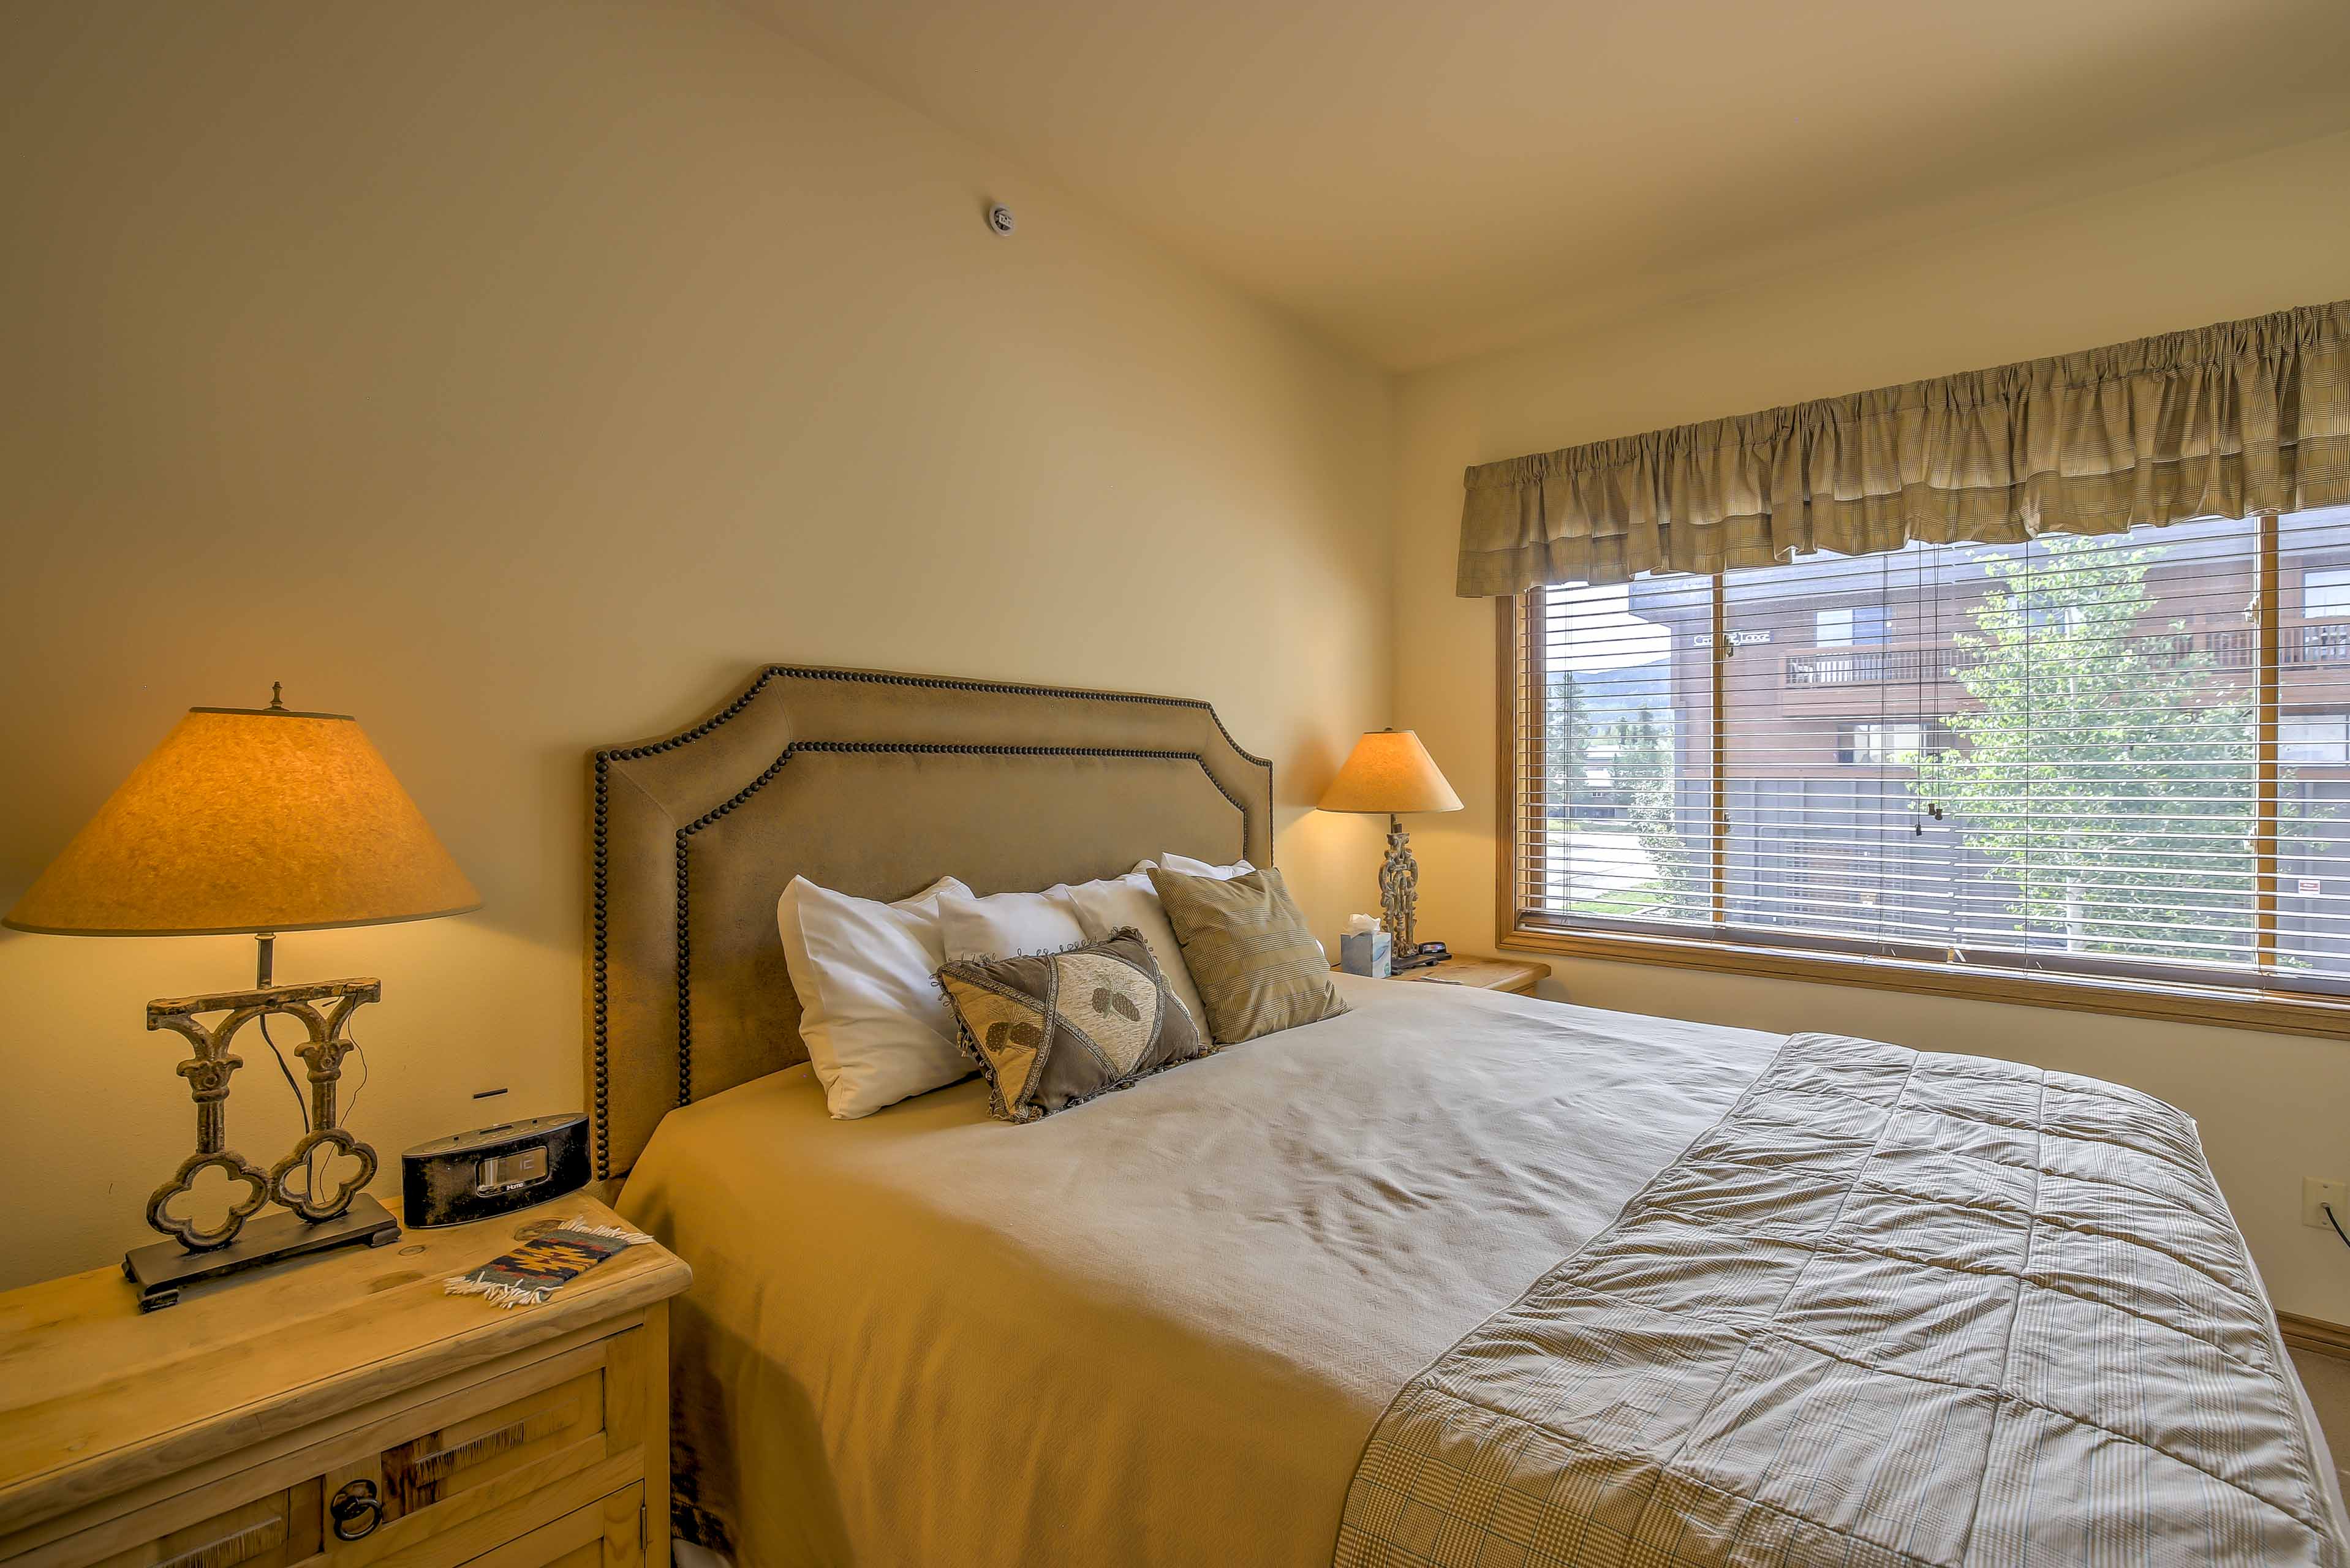 Two guests will fall fast asleep in the king-sized bed in the master bedroom.